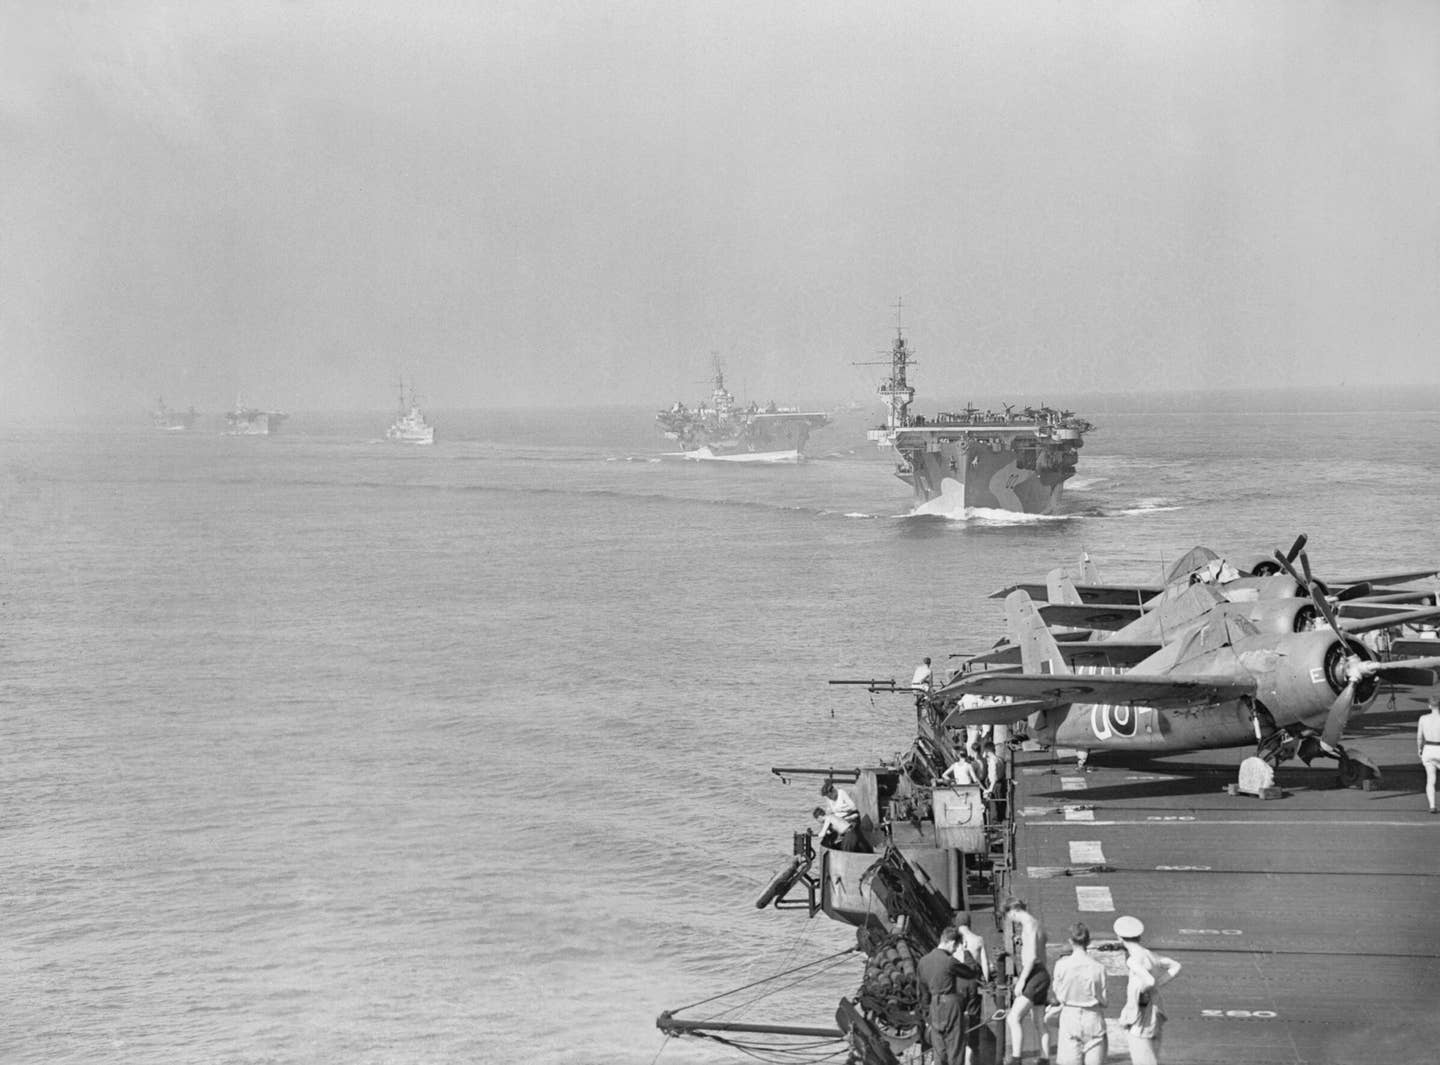 Scene from HMS Pursuer of other assault carriers in the force which took part in the landings in the south of France on Aug. 15, 1944. Leading are HMS Attacker and HMS Khedive. Three Grumman Wildcats can be seen parked on the edge of Pursuer's flight deck. (Royal Navy photo)